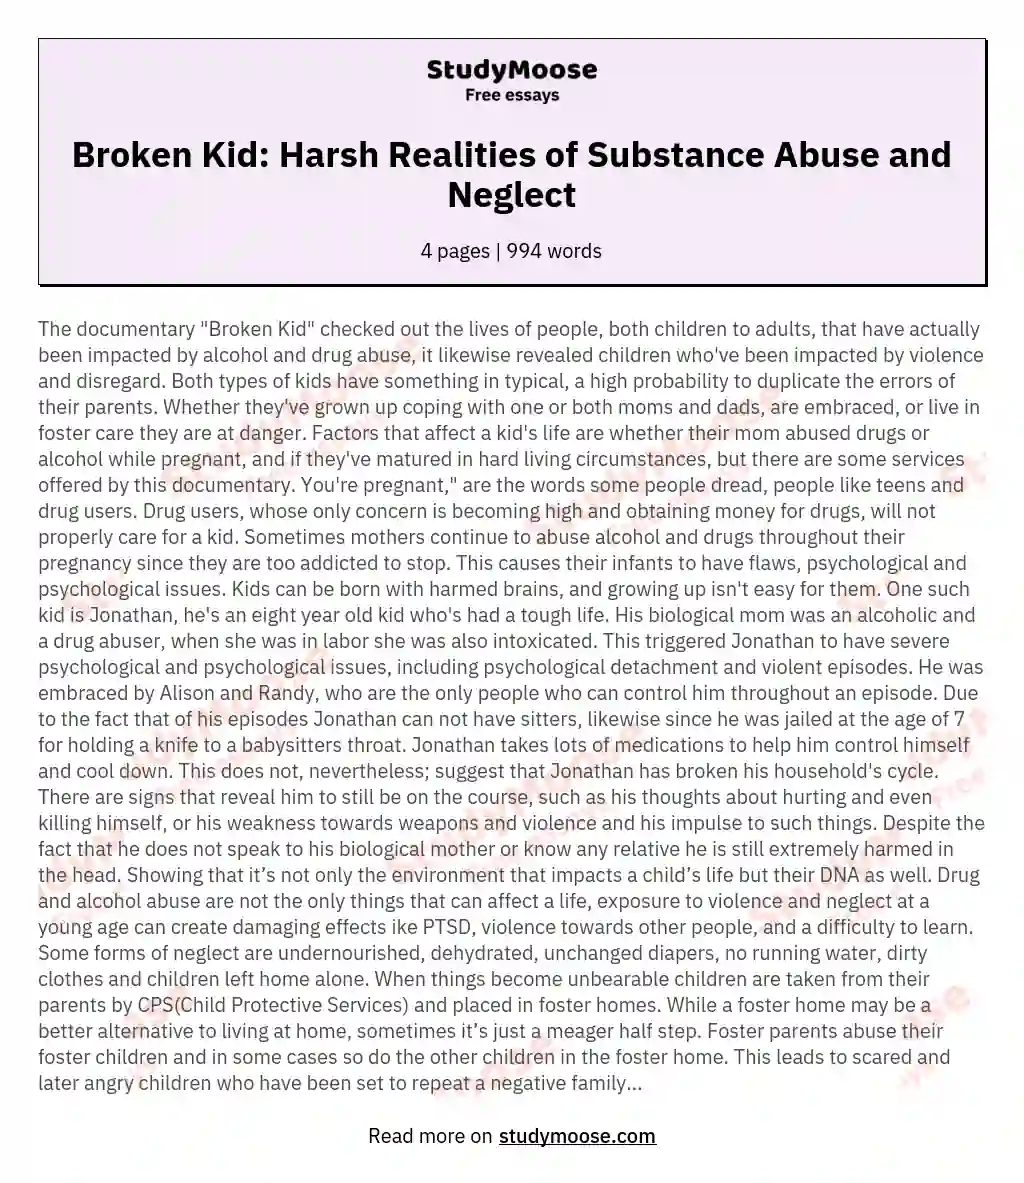 Broken Kid: Harsh Realities of Substance Abuse and Neglect essay